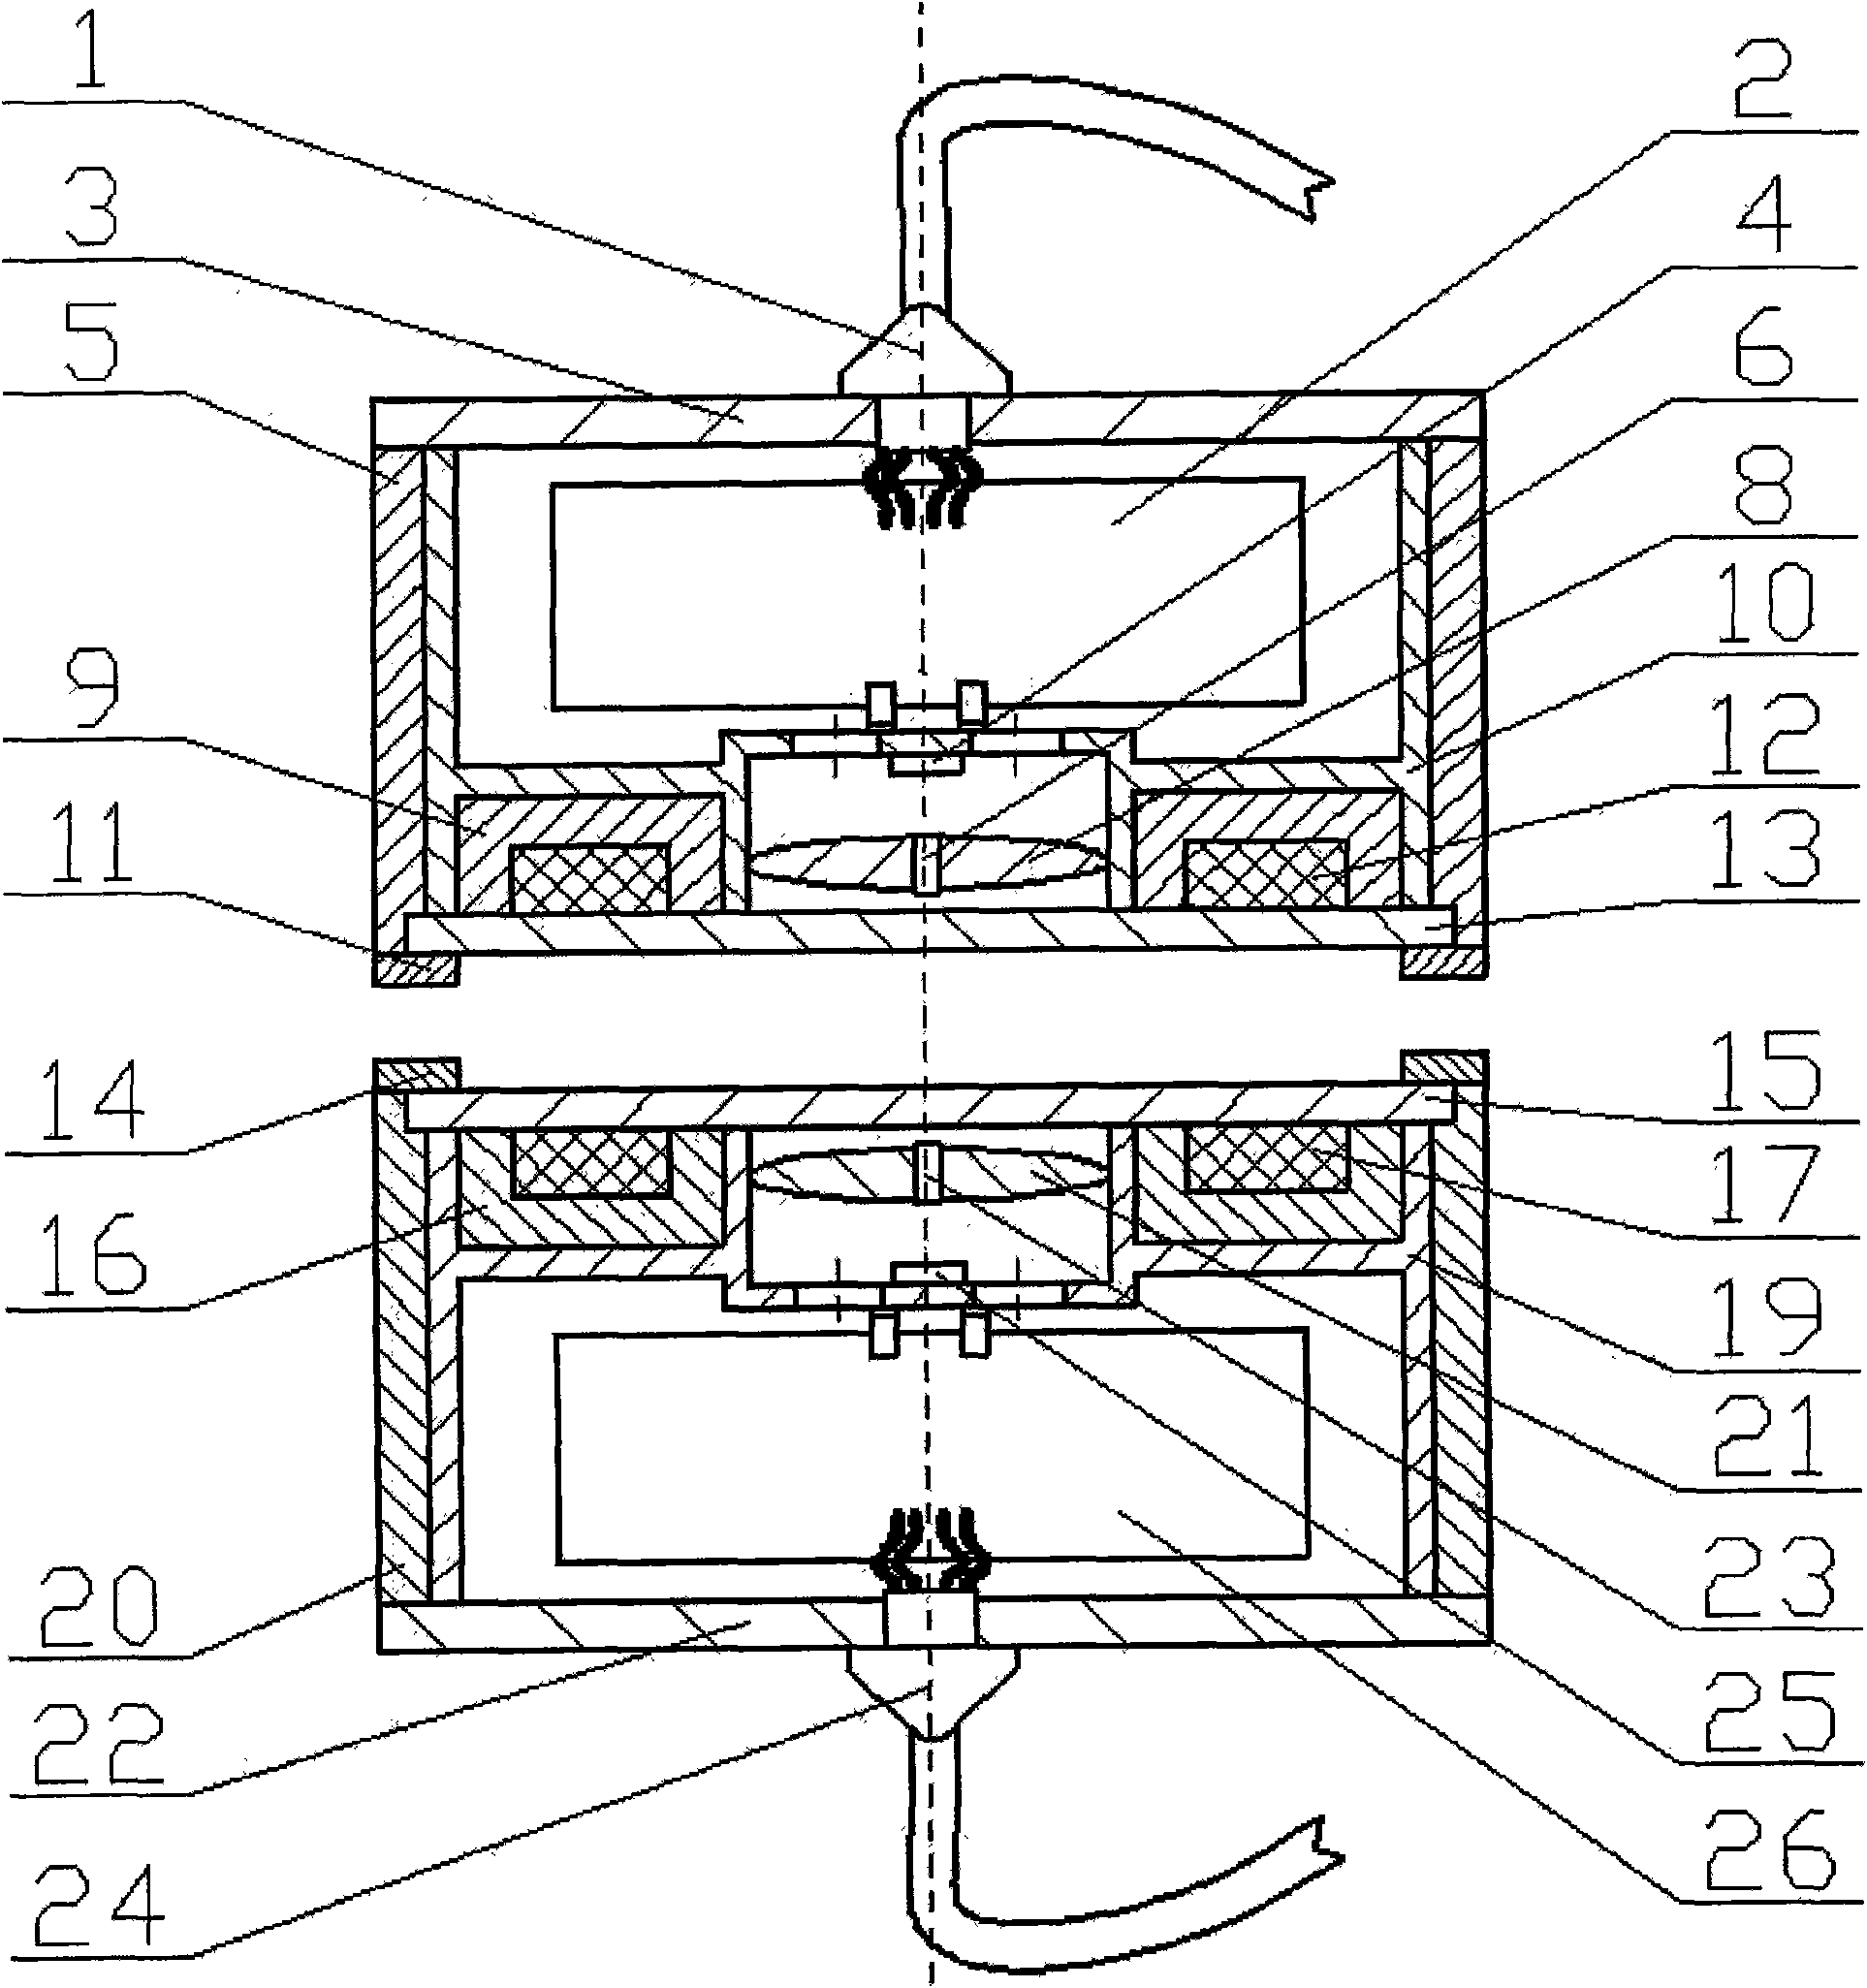 Non-contact connecting device for transmitting underwater electric energy and signal